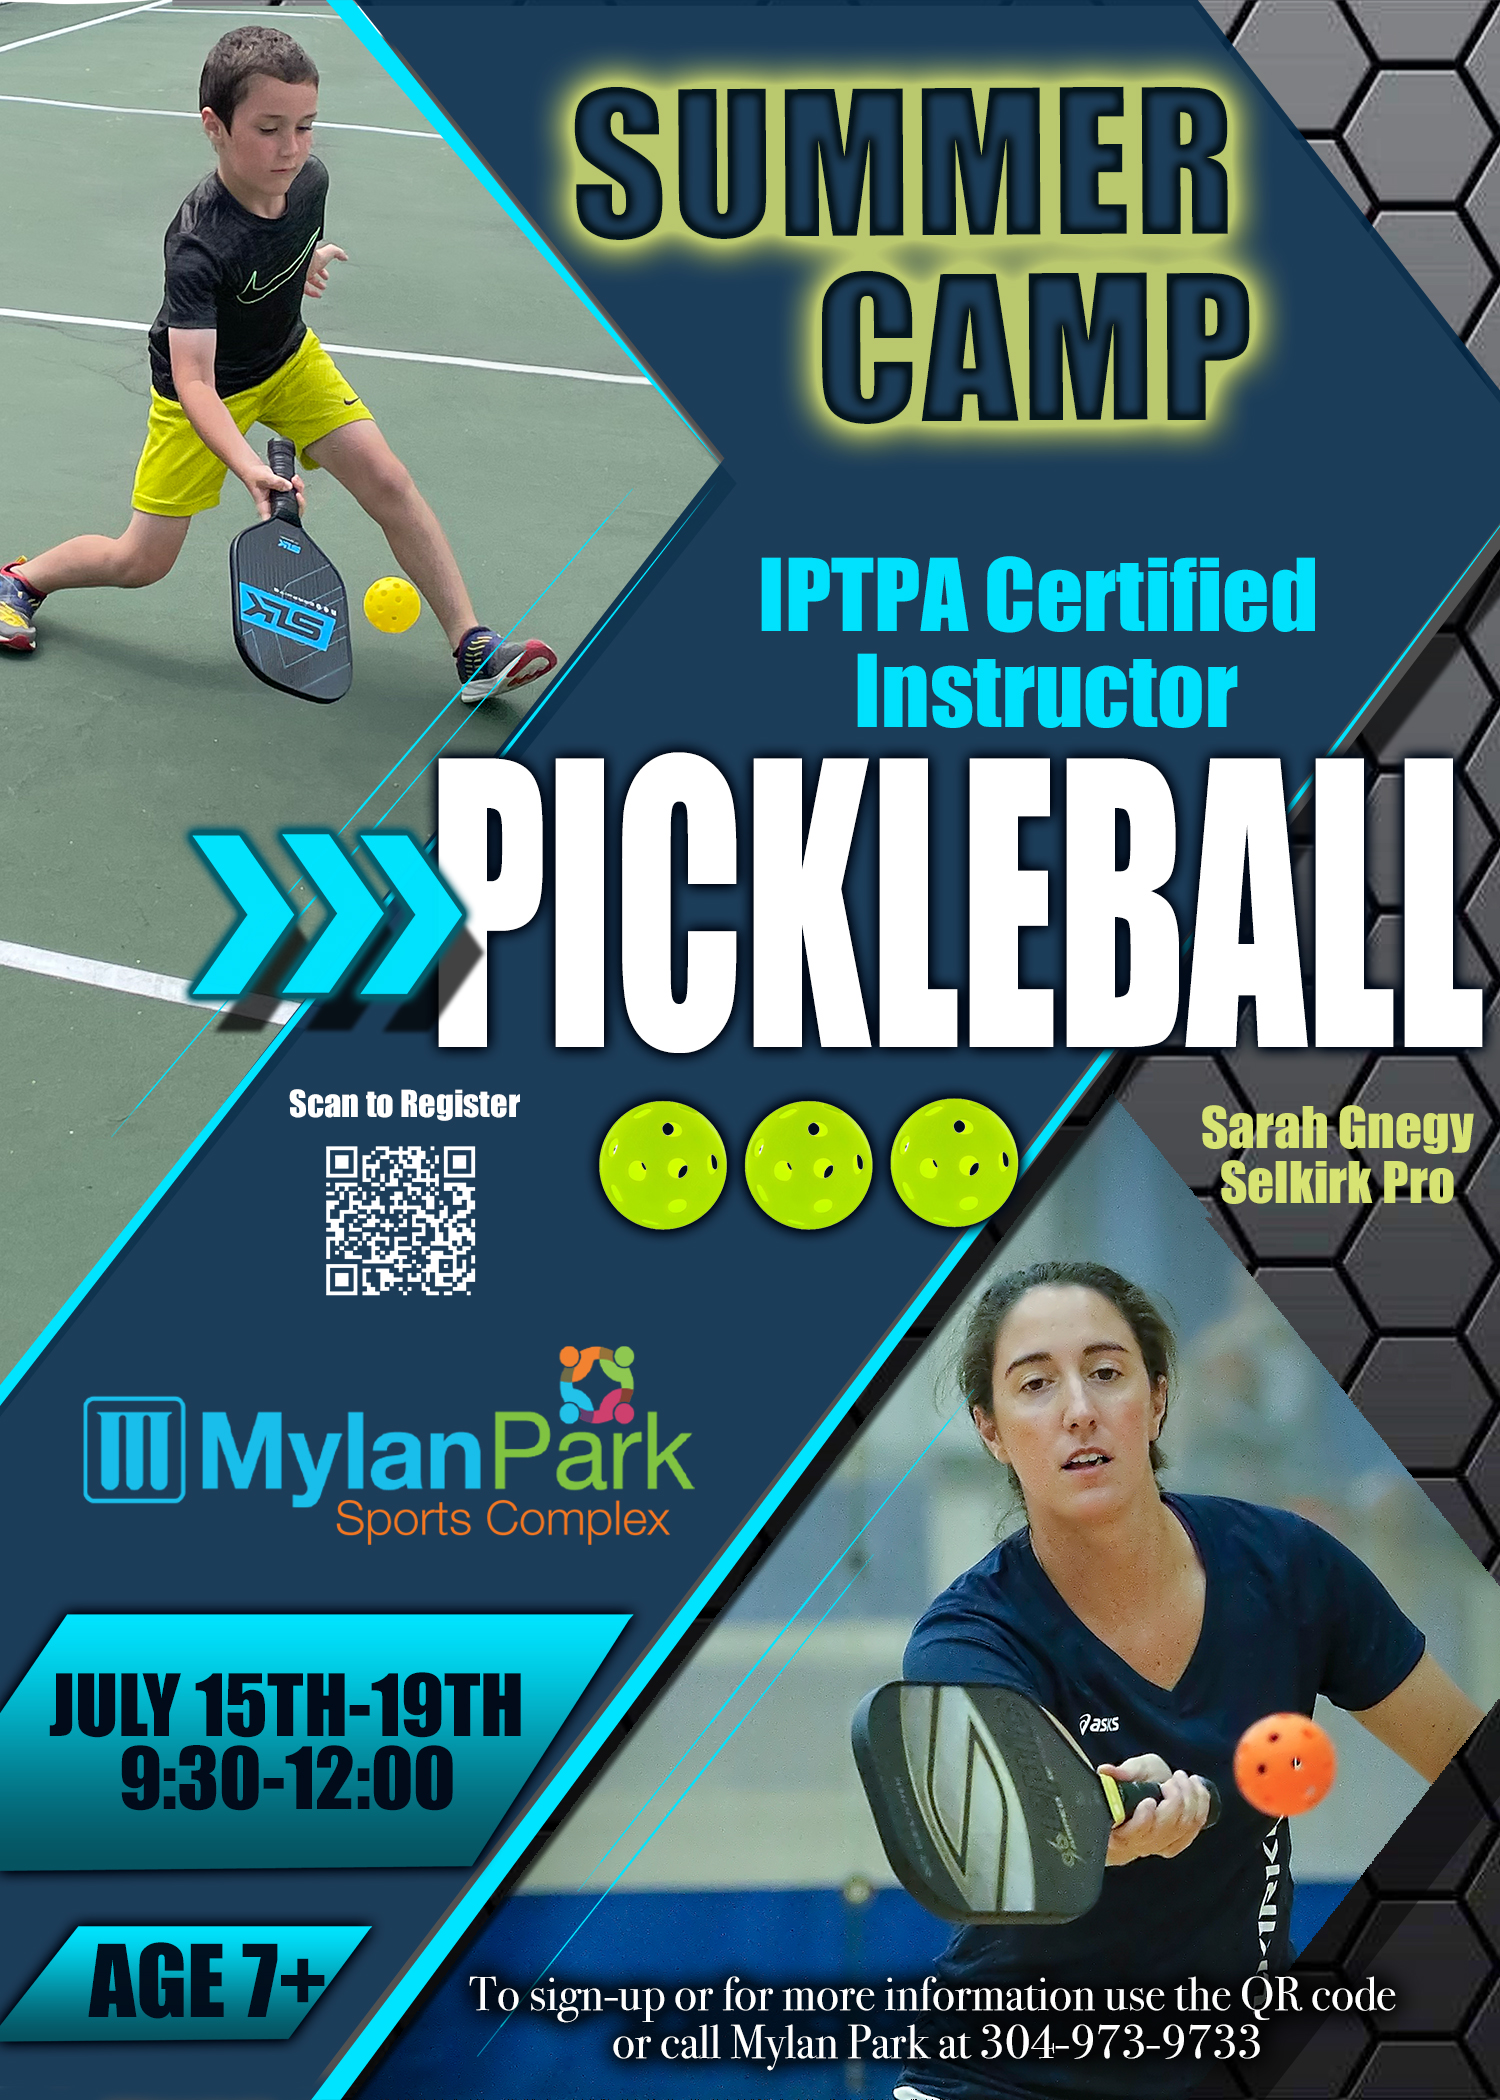 Pickleball Kids Camp at Mylan Park July 15-19 Ages 7 and up